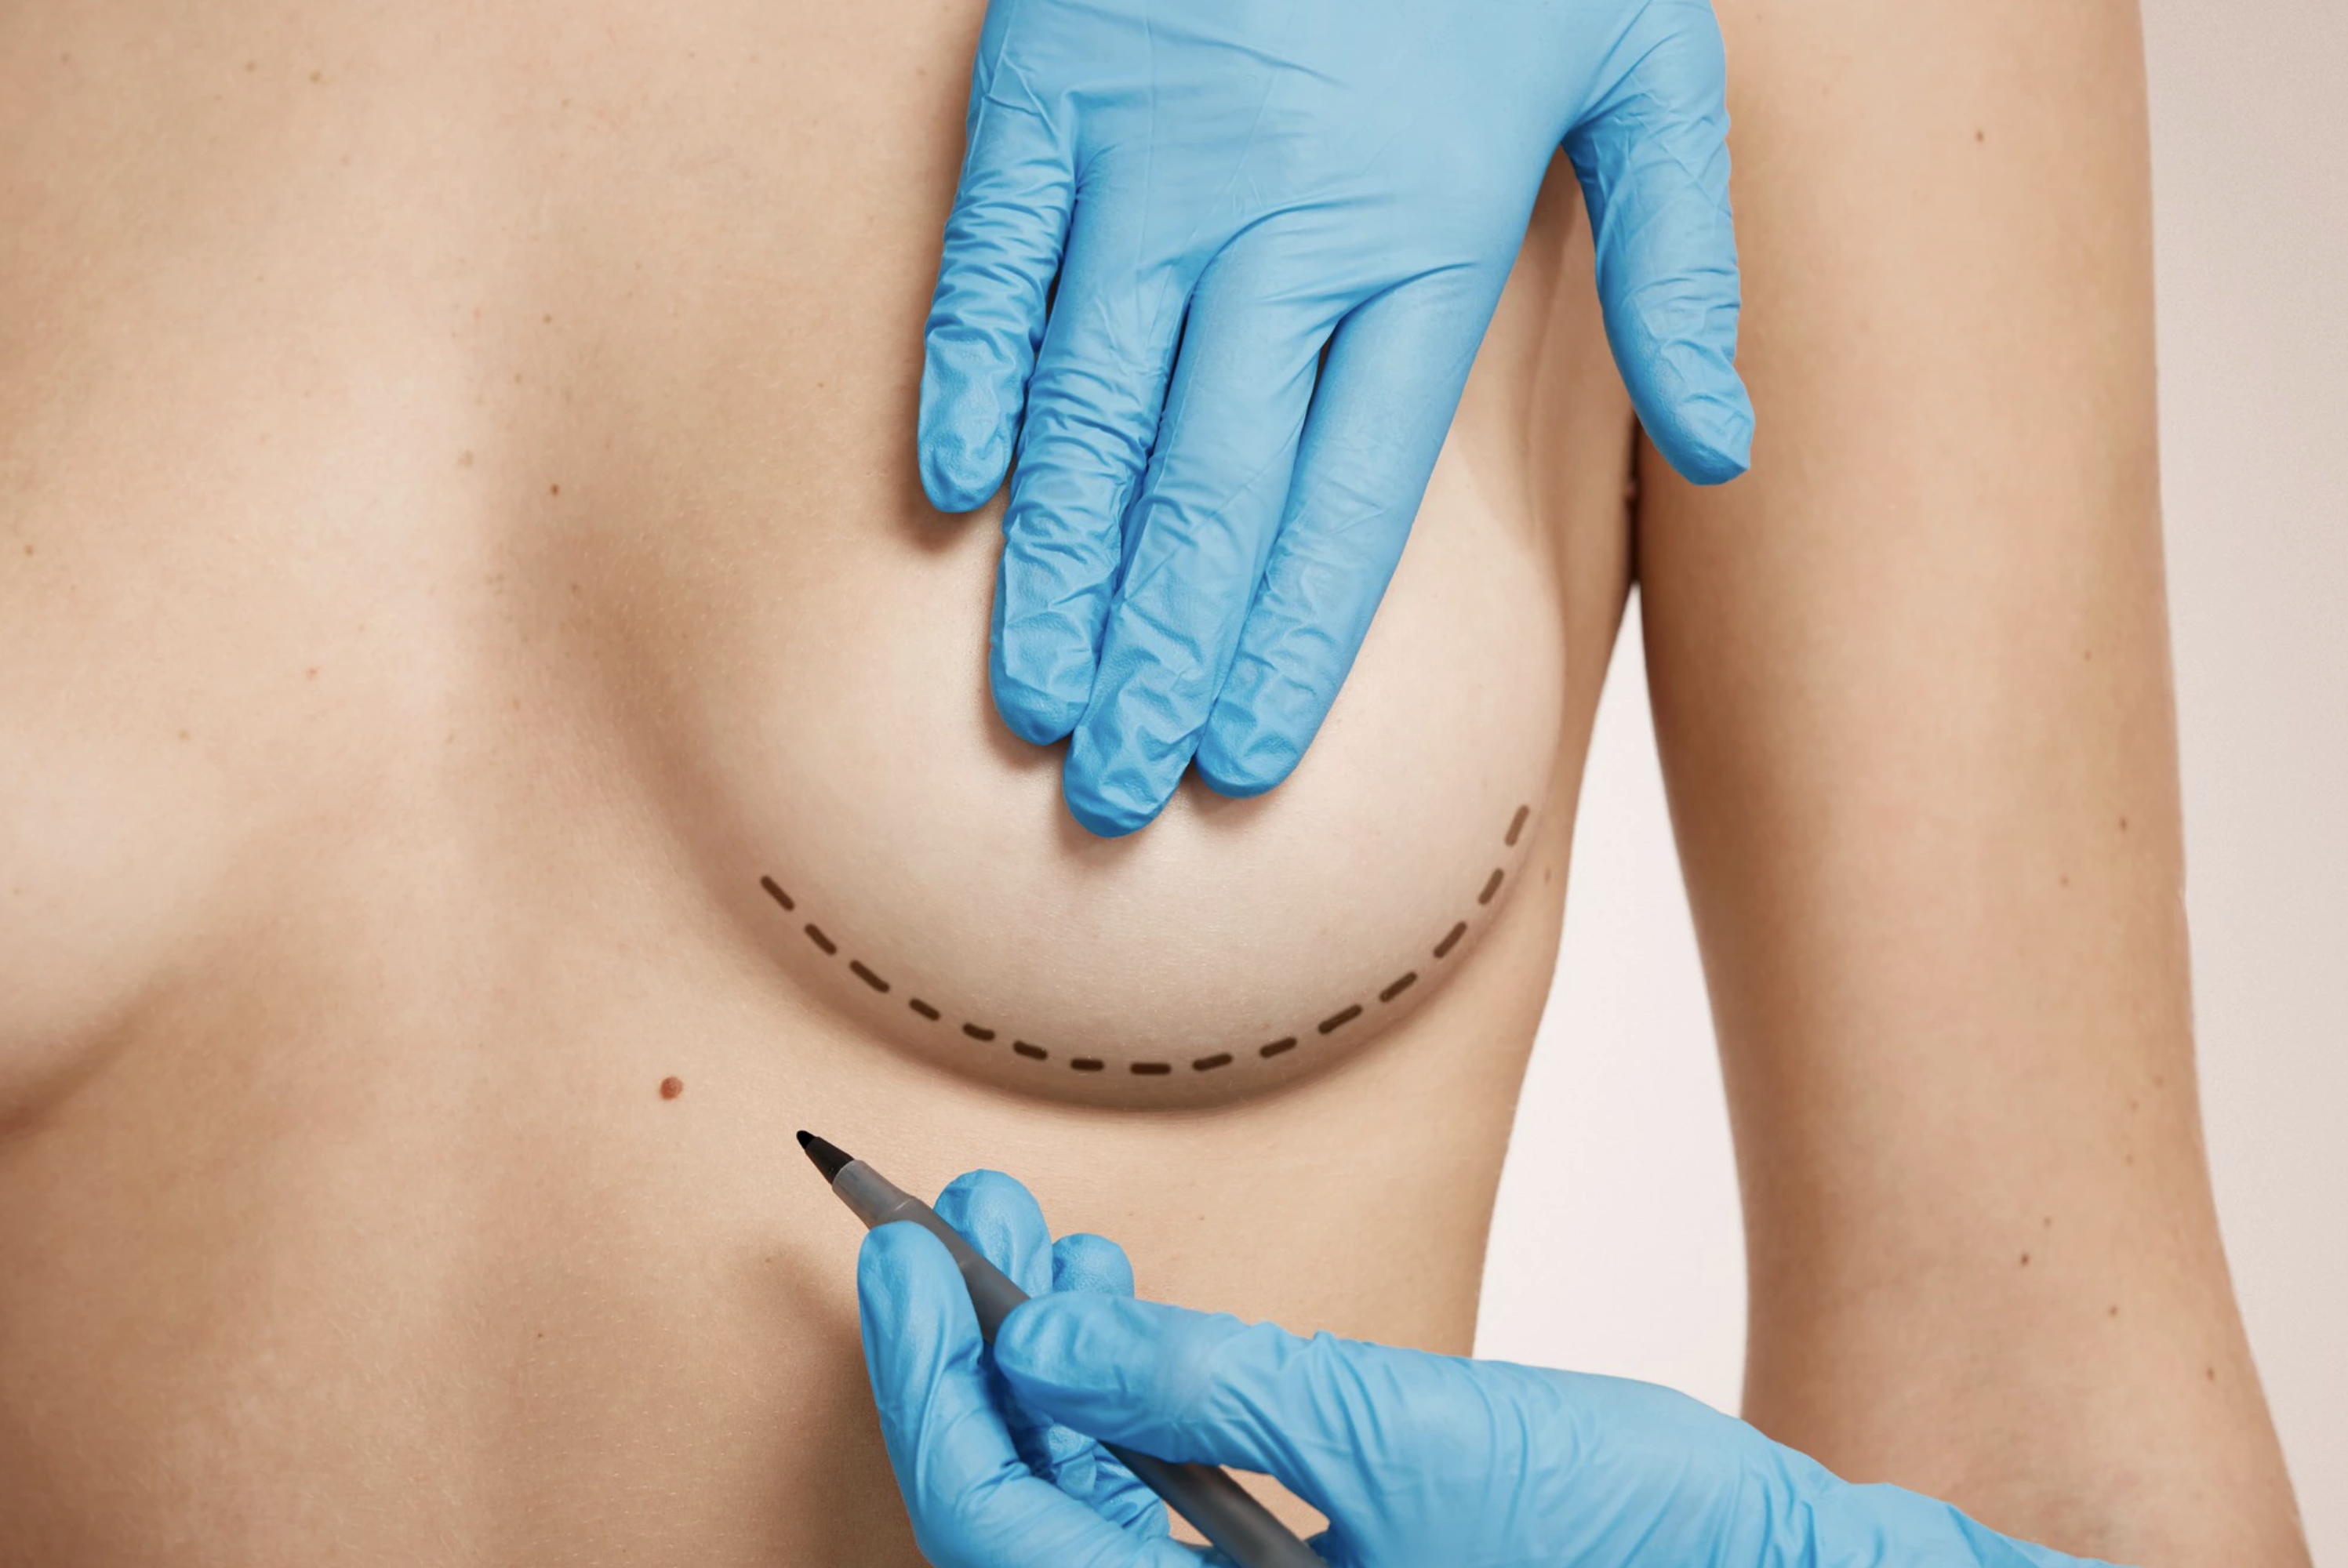 What Is The Recovery Time For Breast Augmentation Surgery?